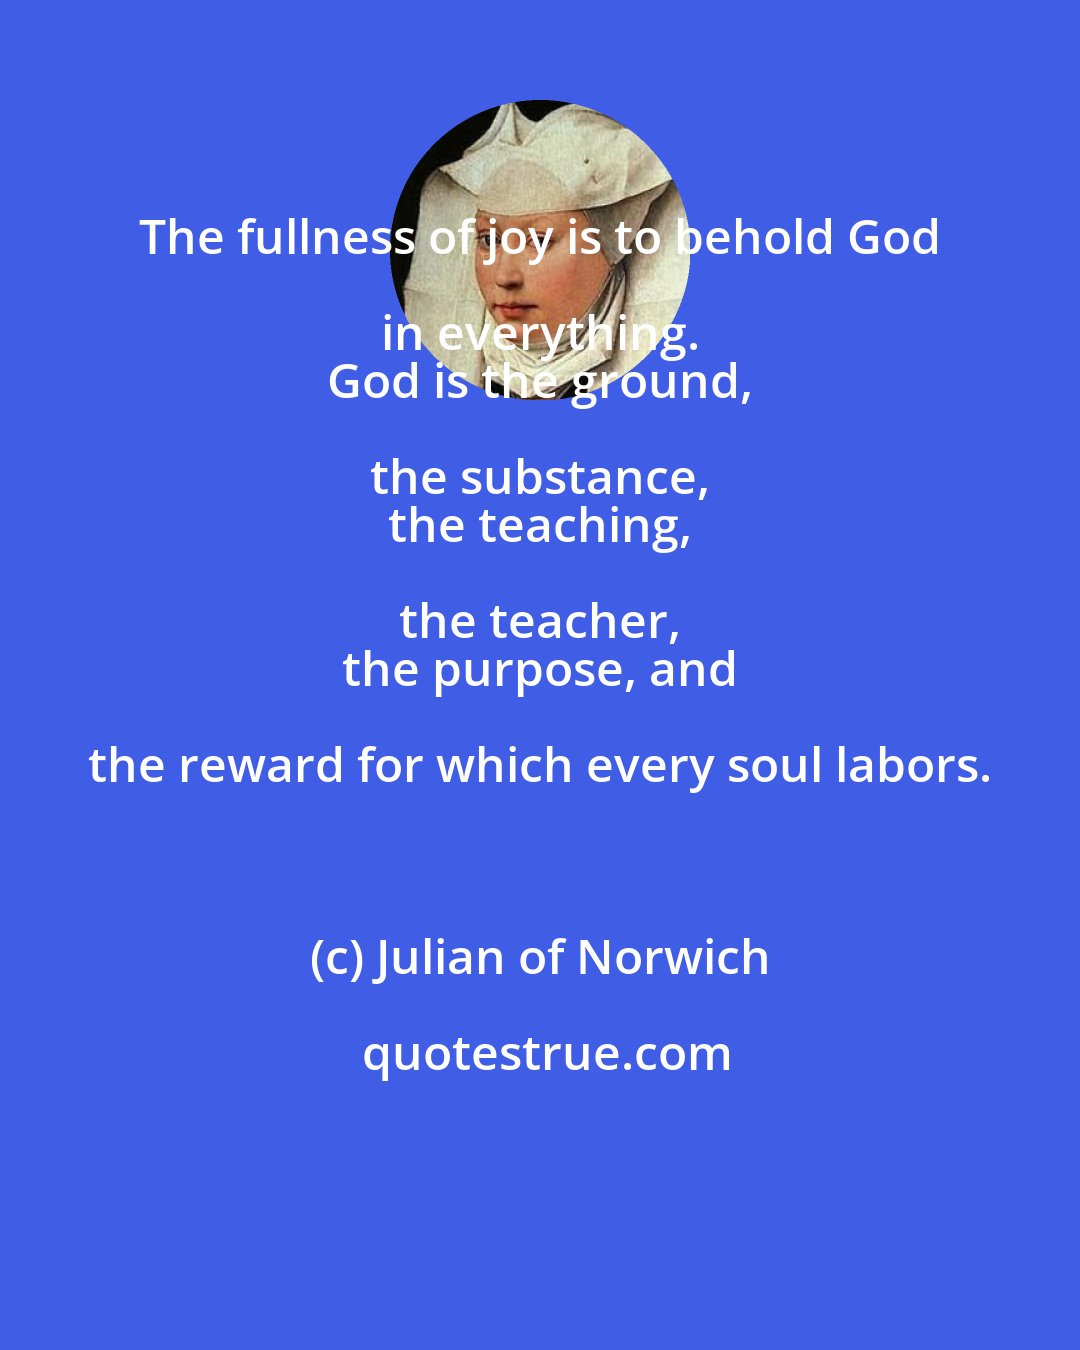 Julian of Norwich: The fullness of joy is to behold God in everything. 
 God is the ground, the substance, 
 the teaching, the teacher, 
 the purpose, and the reward for which every soul labors.